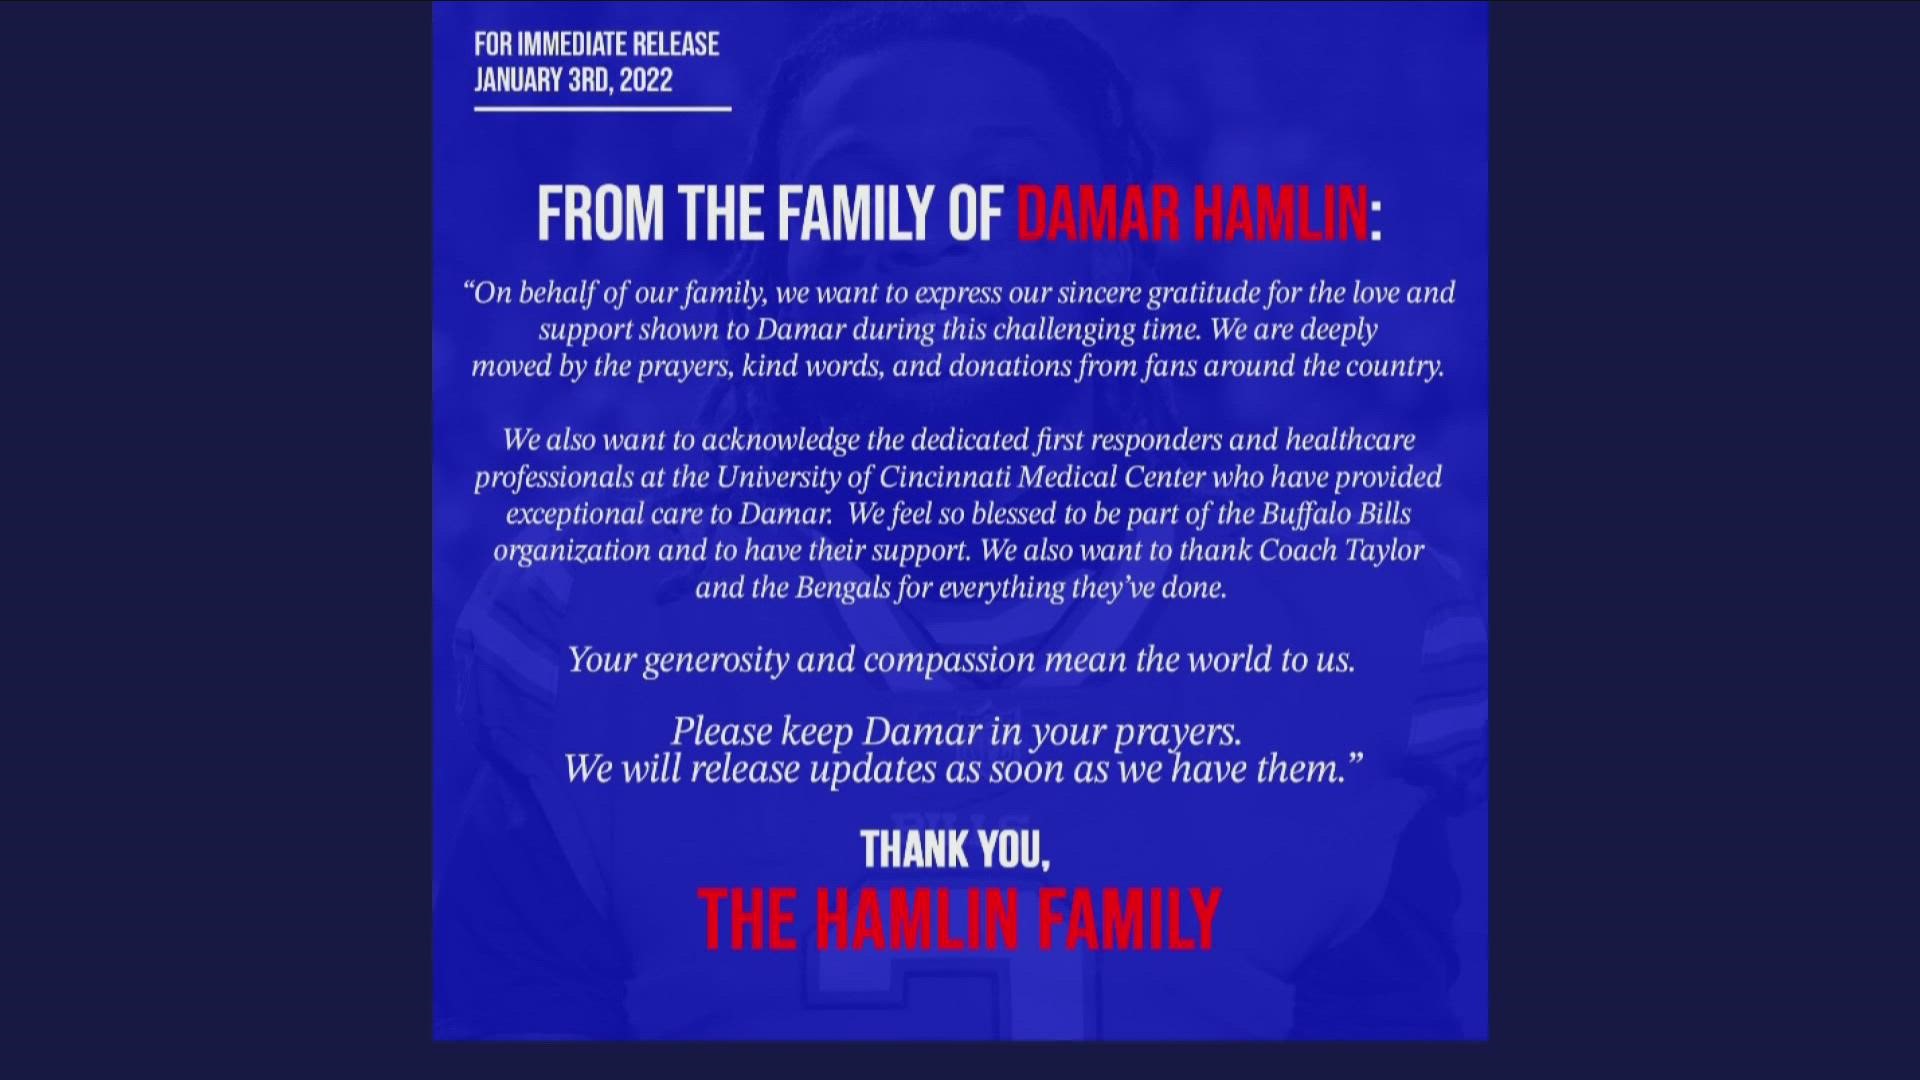 Outpouring of support for Damar Hamlin